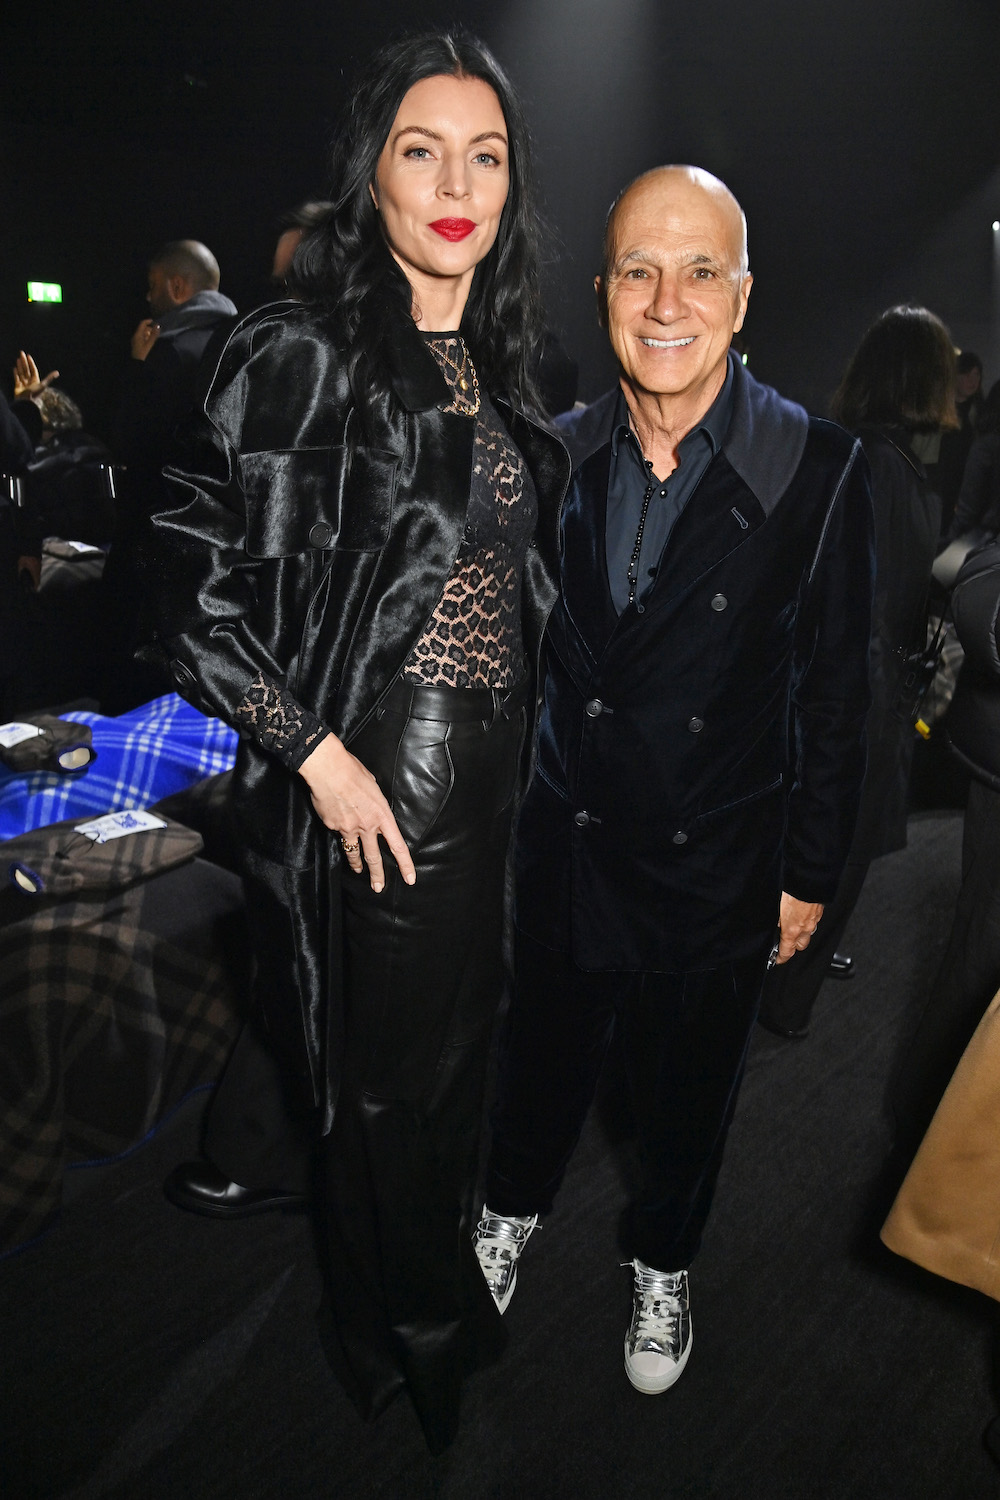 Liberty Ross and Jimmy Iovine